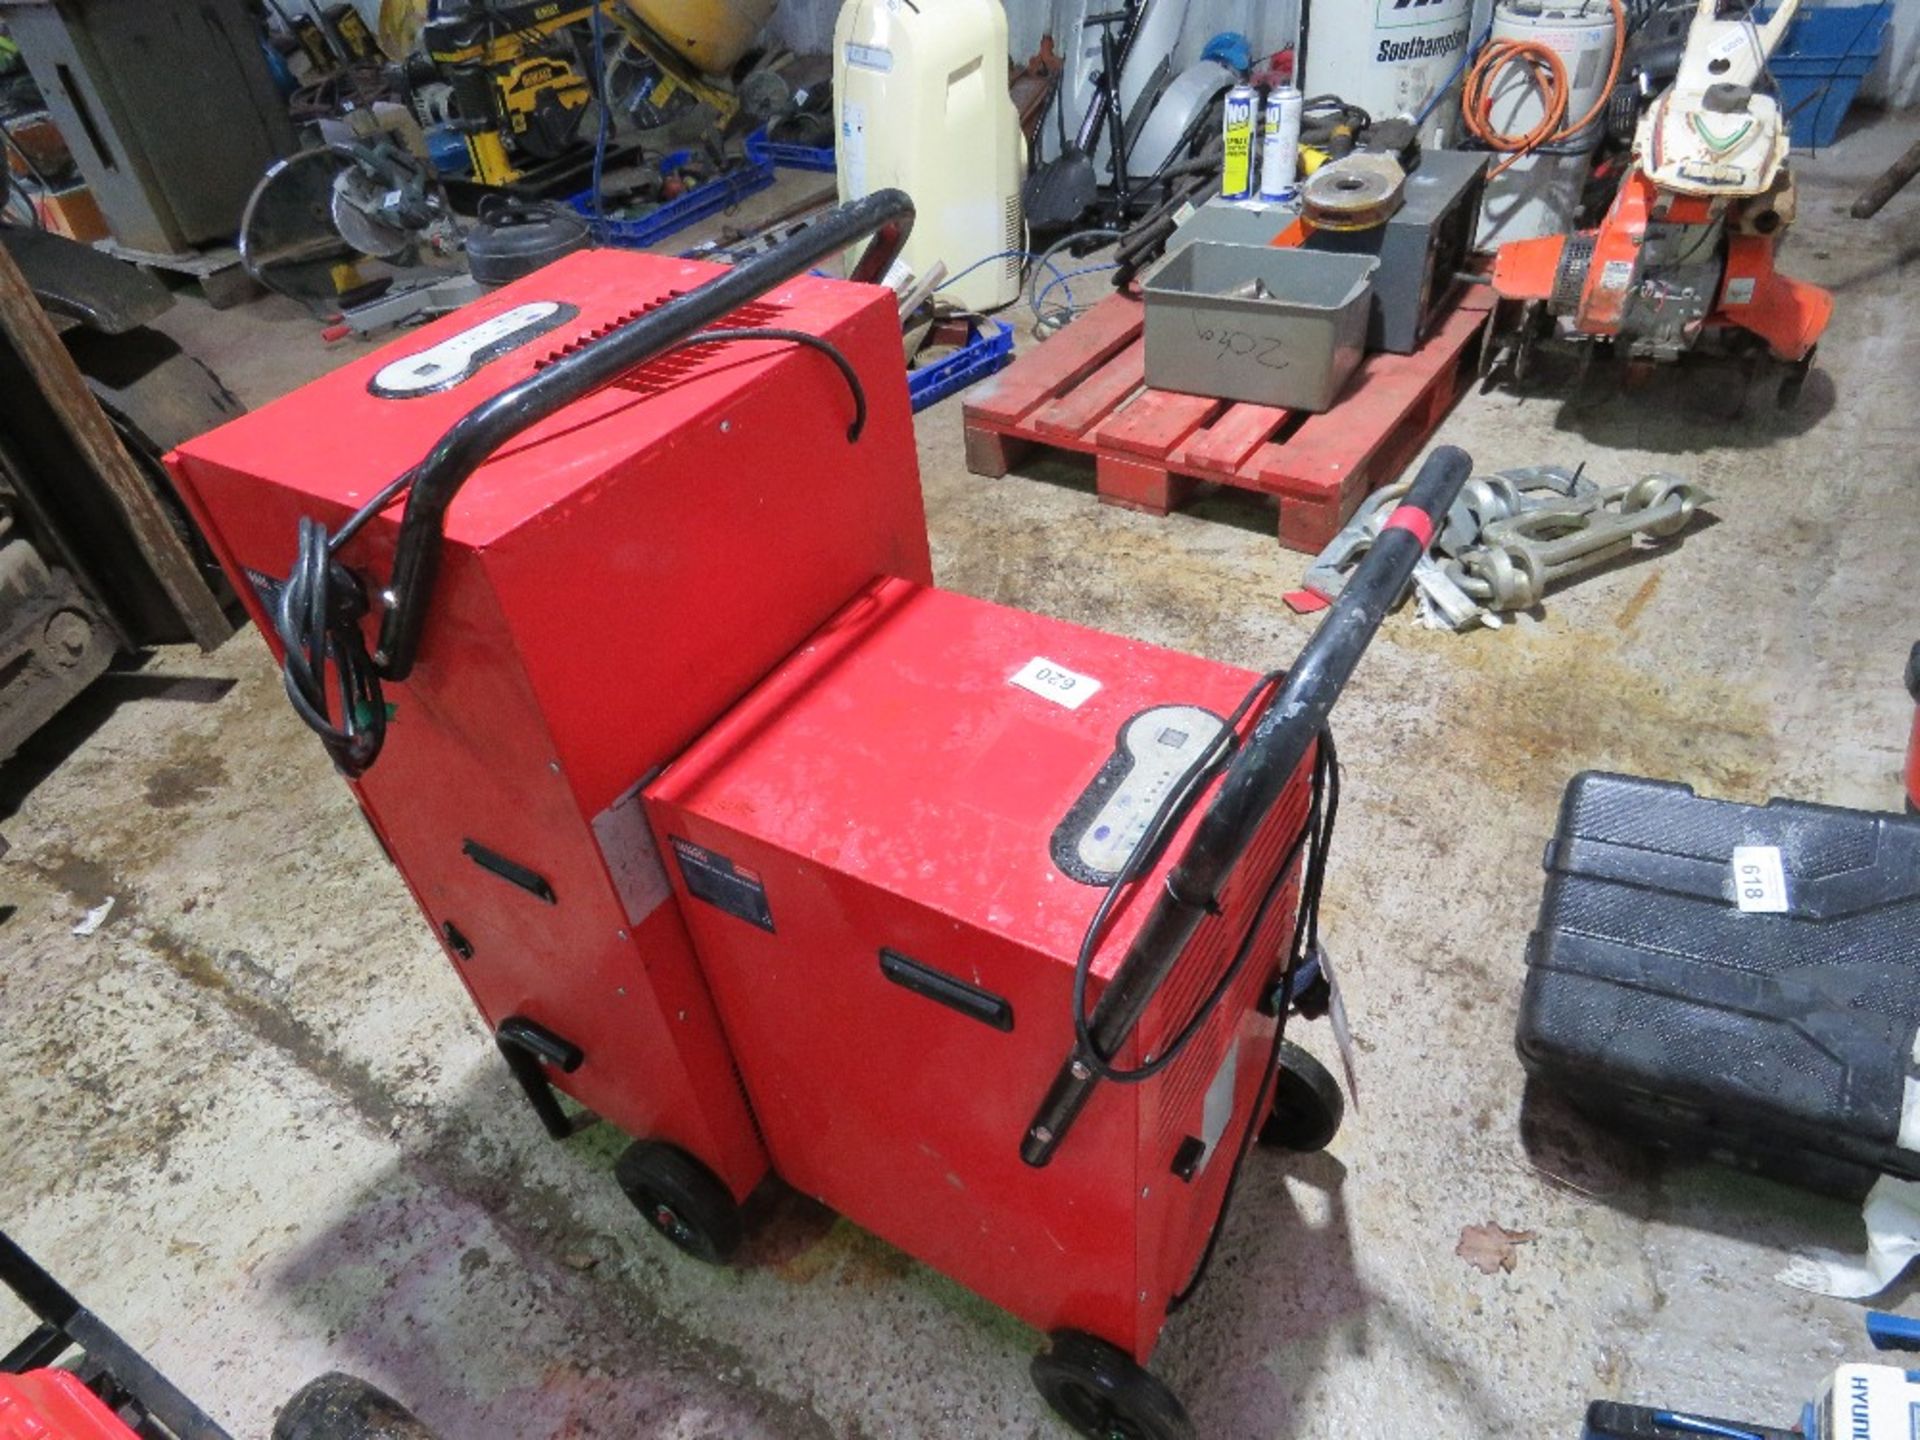 2 X SEALEY RED COLOURED DEHUMIDIFIERS, 240VOLT POWERED. THIS LOT IS SOLD UNDER THE AUCTIONEERS MA - Image 3 of 5